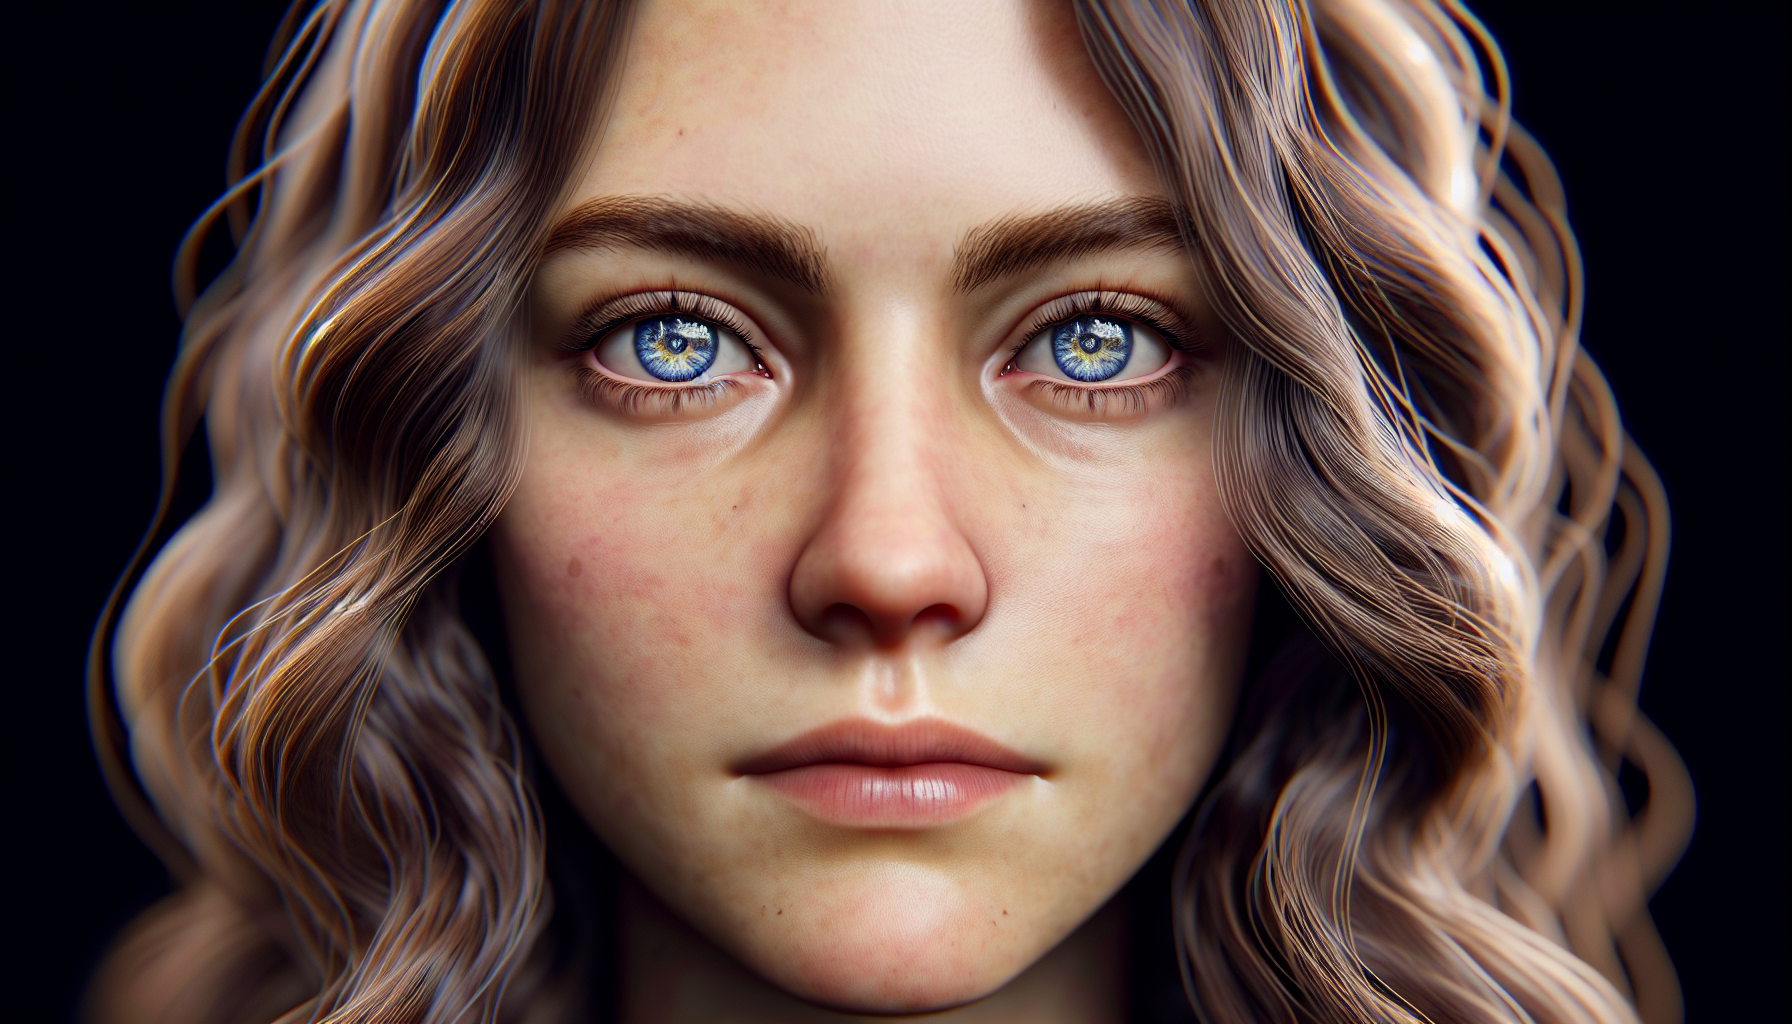 AI-generated realistic image of a human face